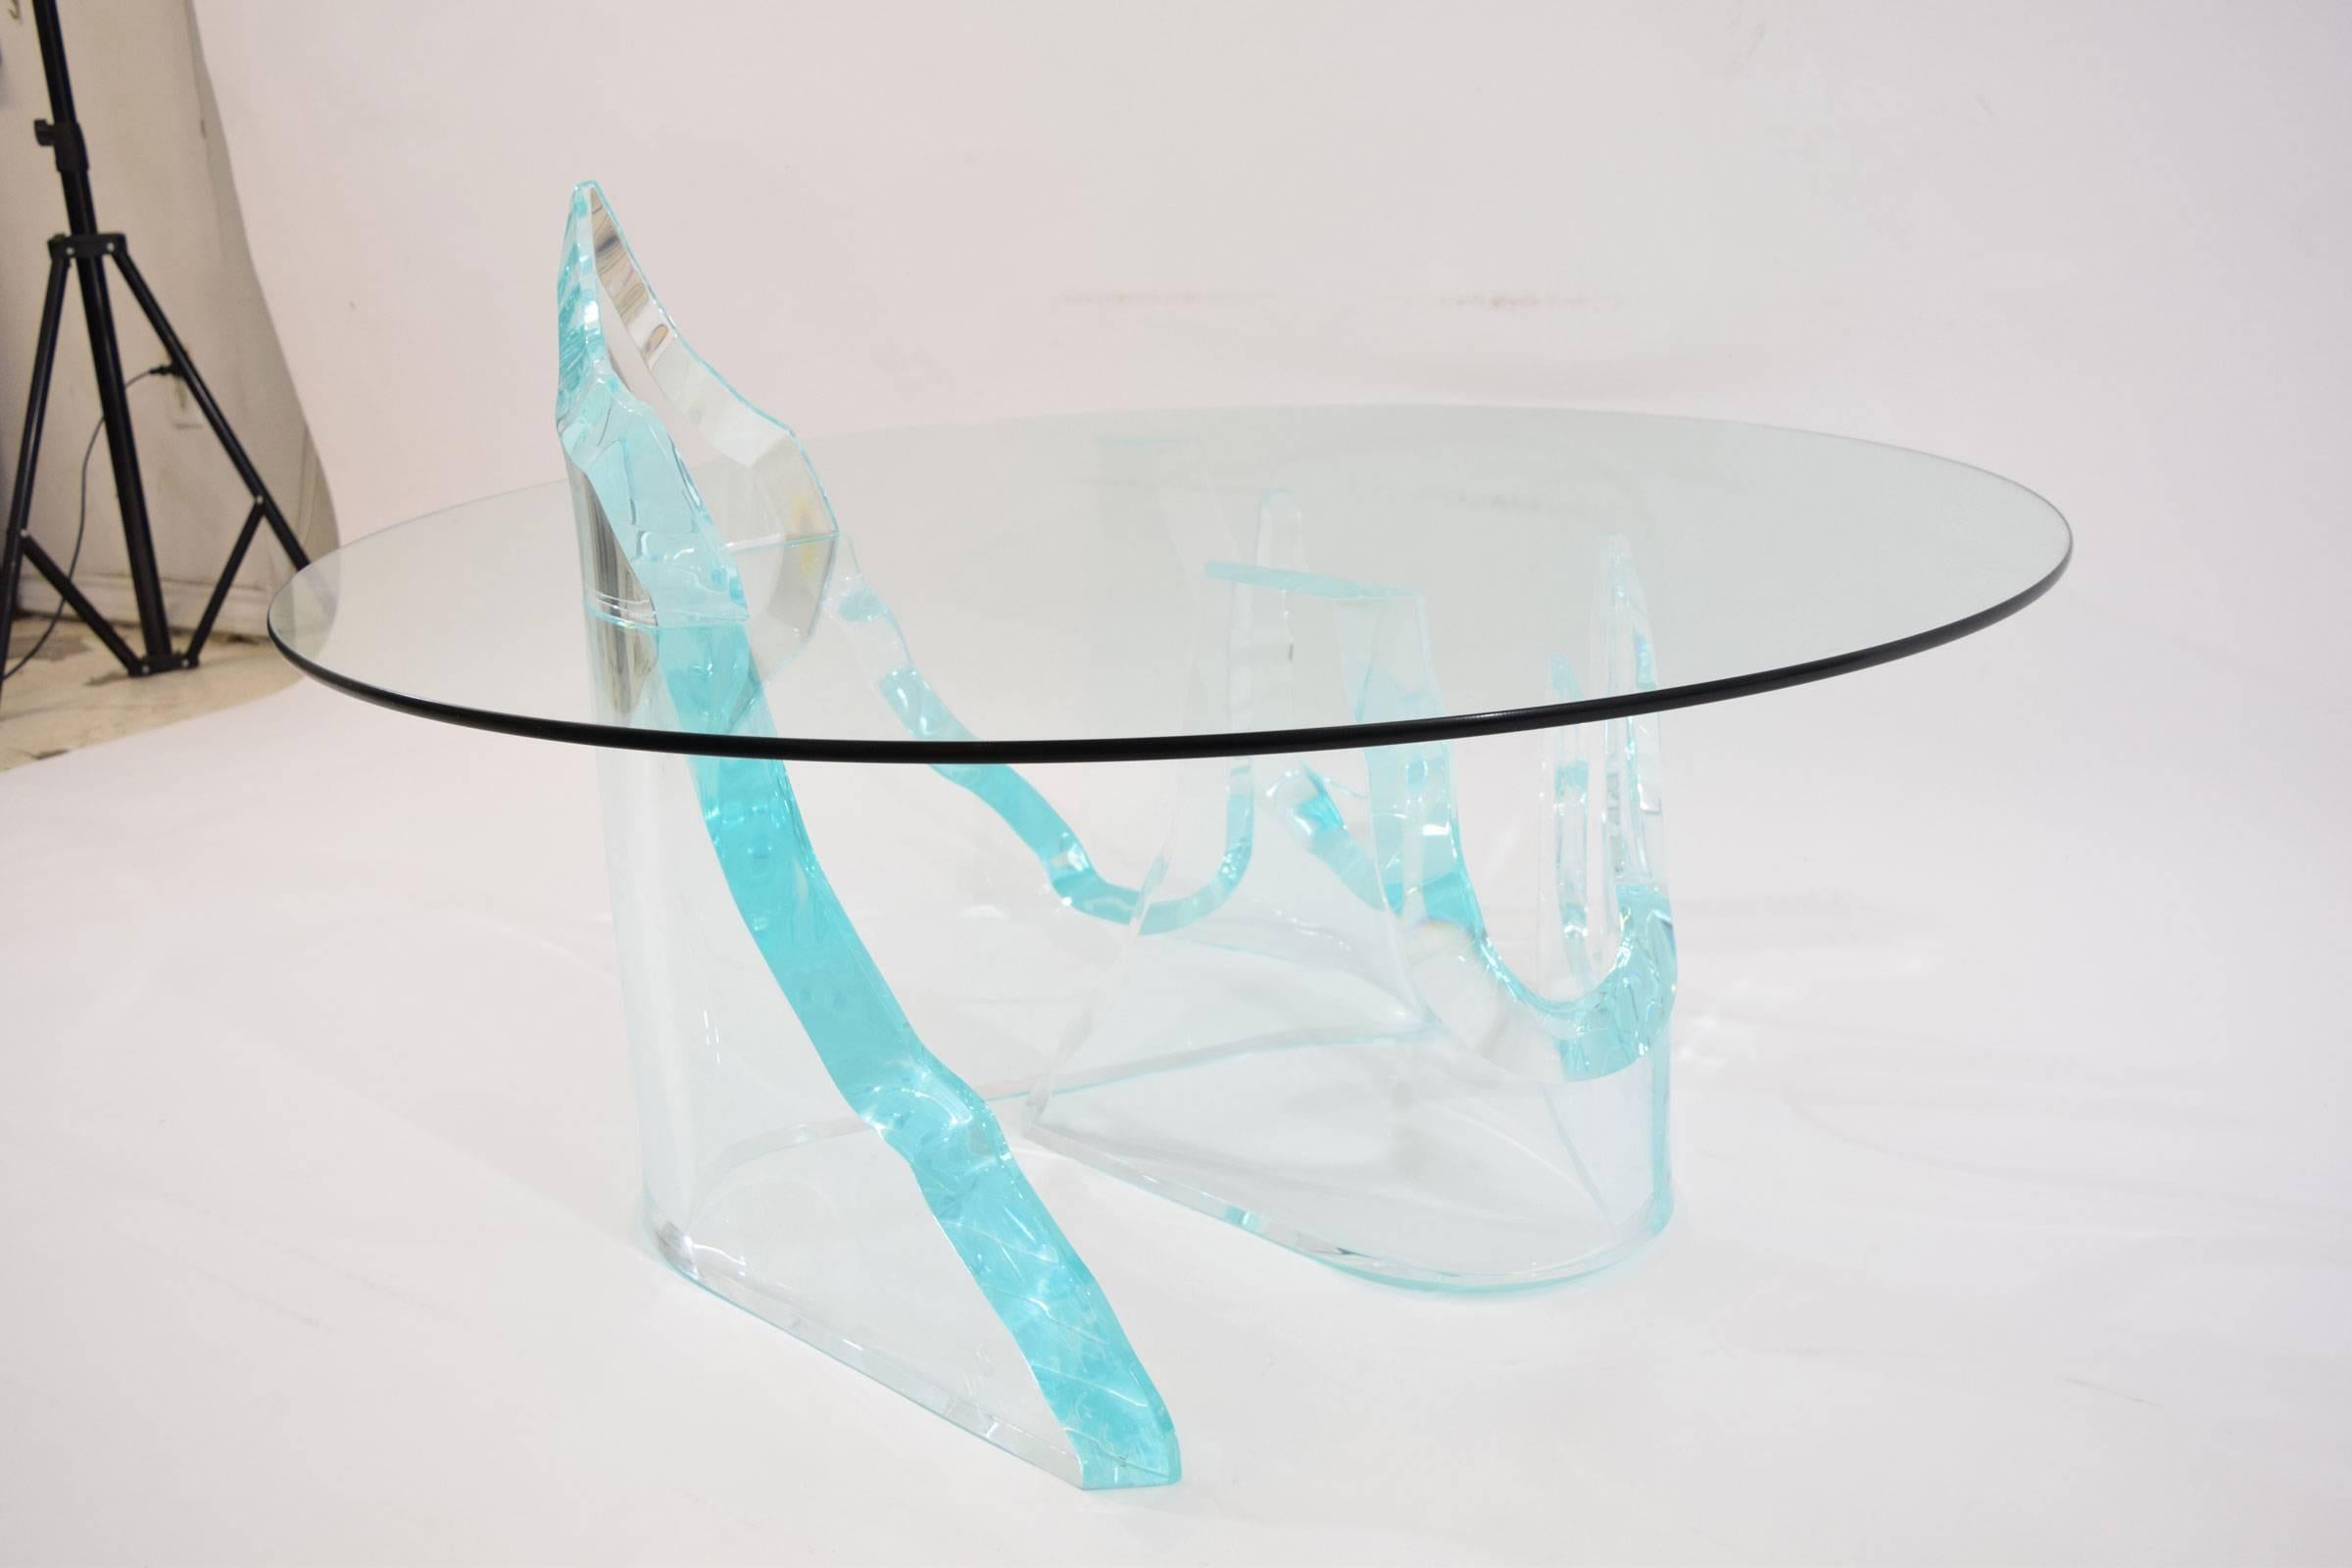 This table has two thick Lucite bases with a turquoise reflection. The bases can accommodate a larger piece of glass if desired. There is one cap that sits on top of the glass and the can be removed. Table has "Lion in Frost" signature.